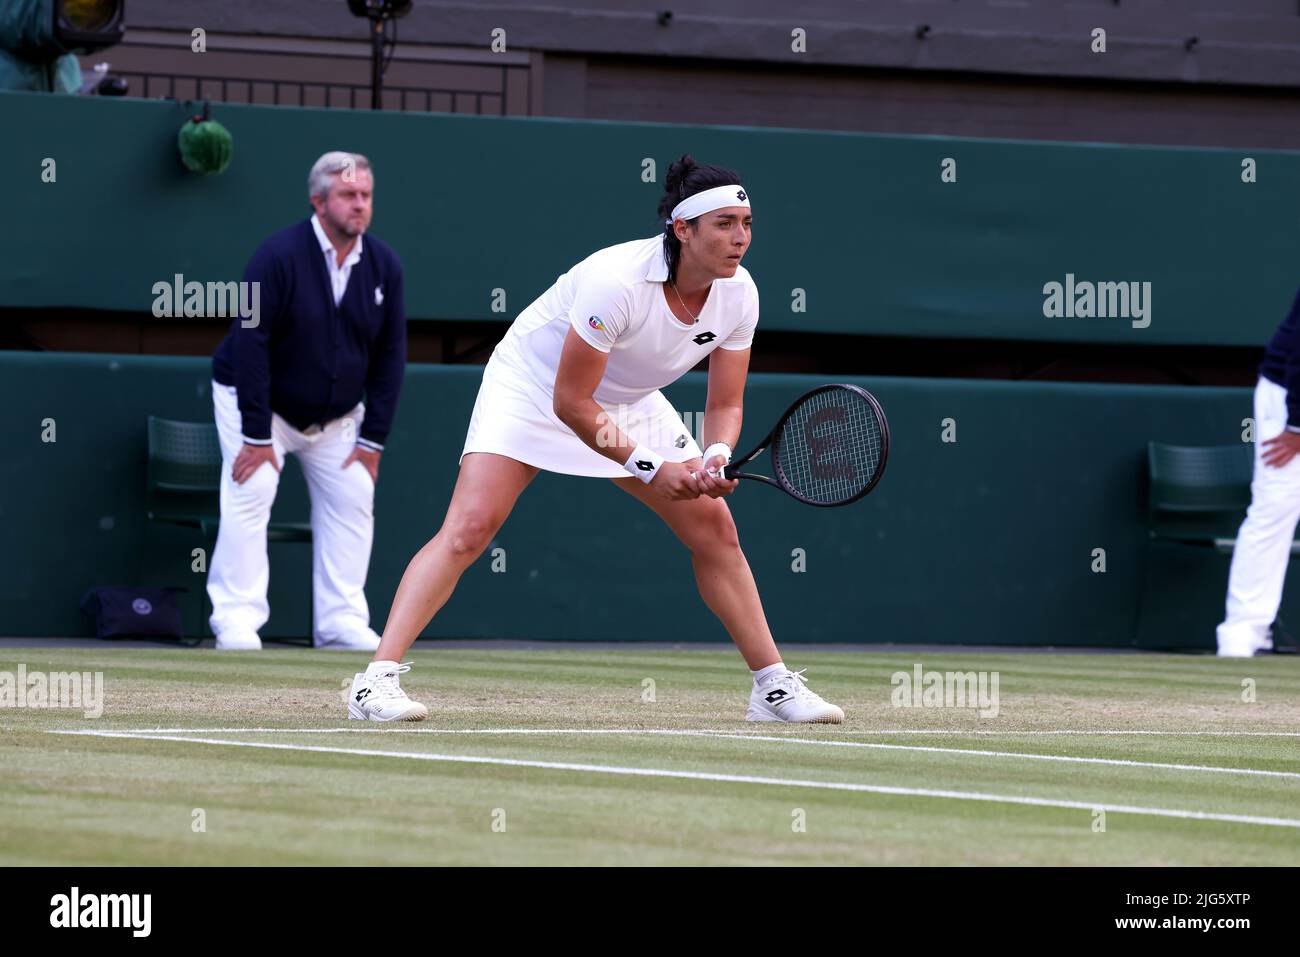 5 July 2022, All England Lawn Tennis Club, Wimbledon, London, United Kingdom:  Tunisia's Ons Jabeur awaits serve from Marie Bouzkova of the Czech Republic during their quarterfinal match at Wimbledon today.  Jabeur won the match to advance to the semi finals. Stock Photo